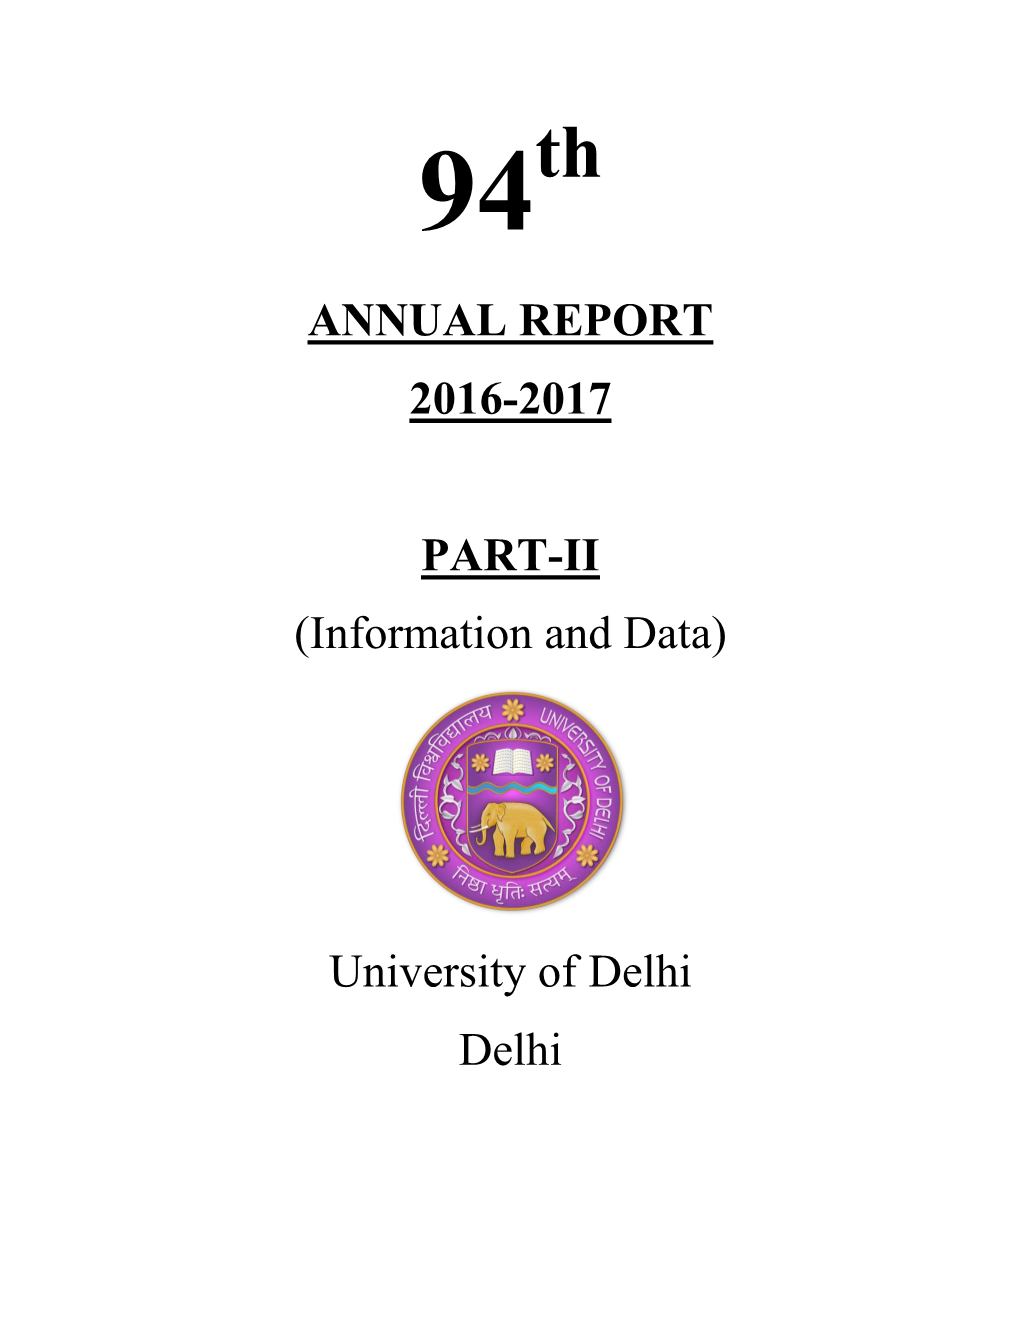 ANNUAL REPORT 2016-2017 PART-II (Information and Data)